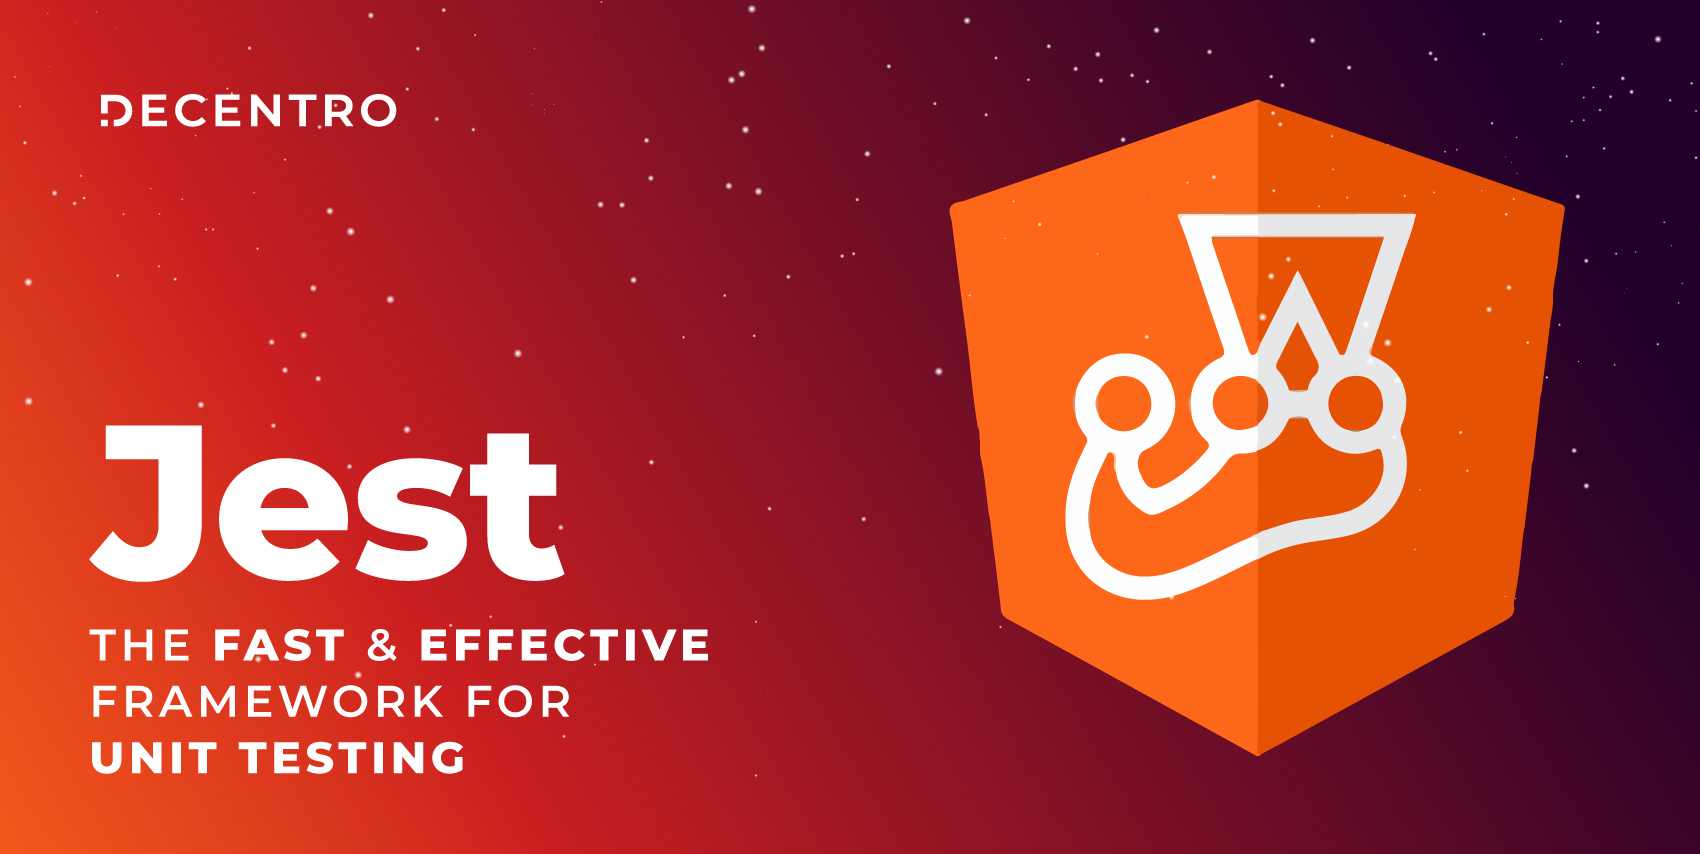 jest-the-fast-and-effective-framework-for-unit-testing-decentro